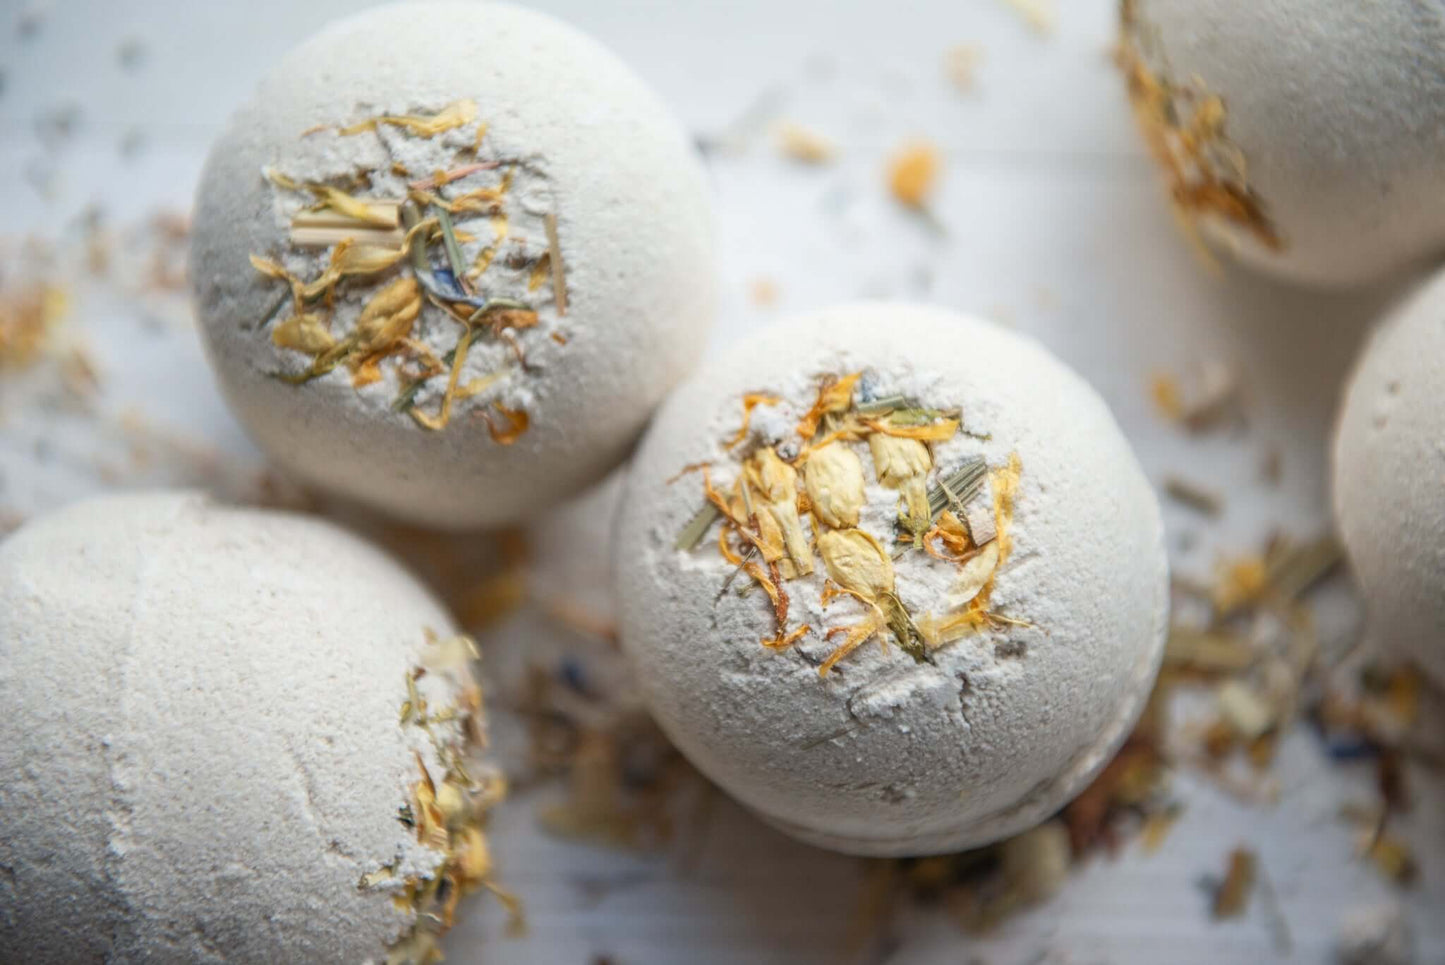 The natural vegan bath bombs with Lemongrass & Green Clay are perfect for moments of self care